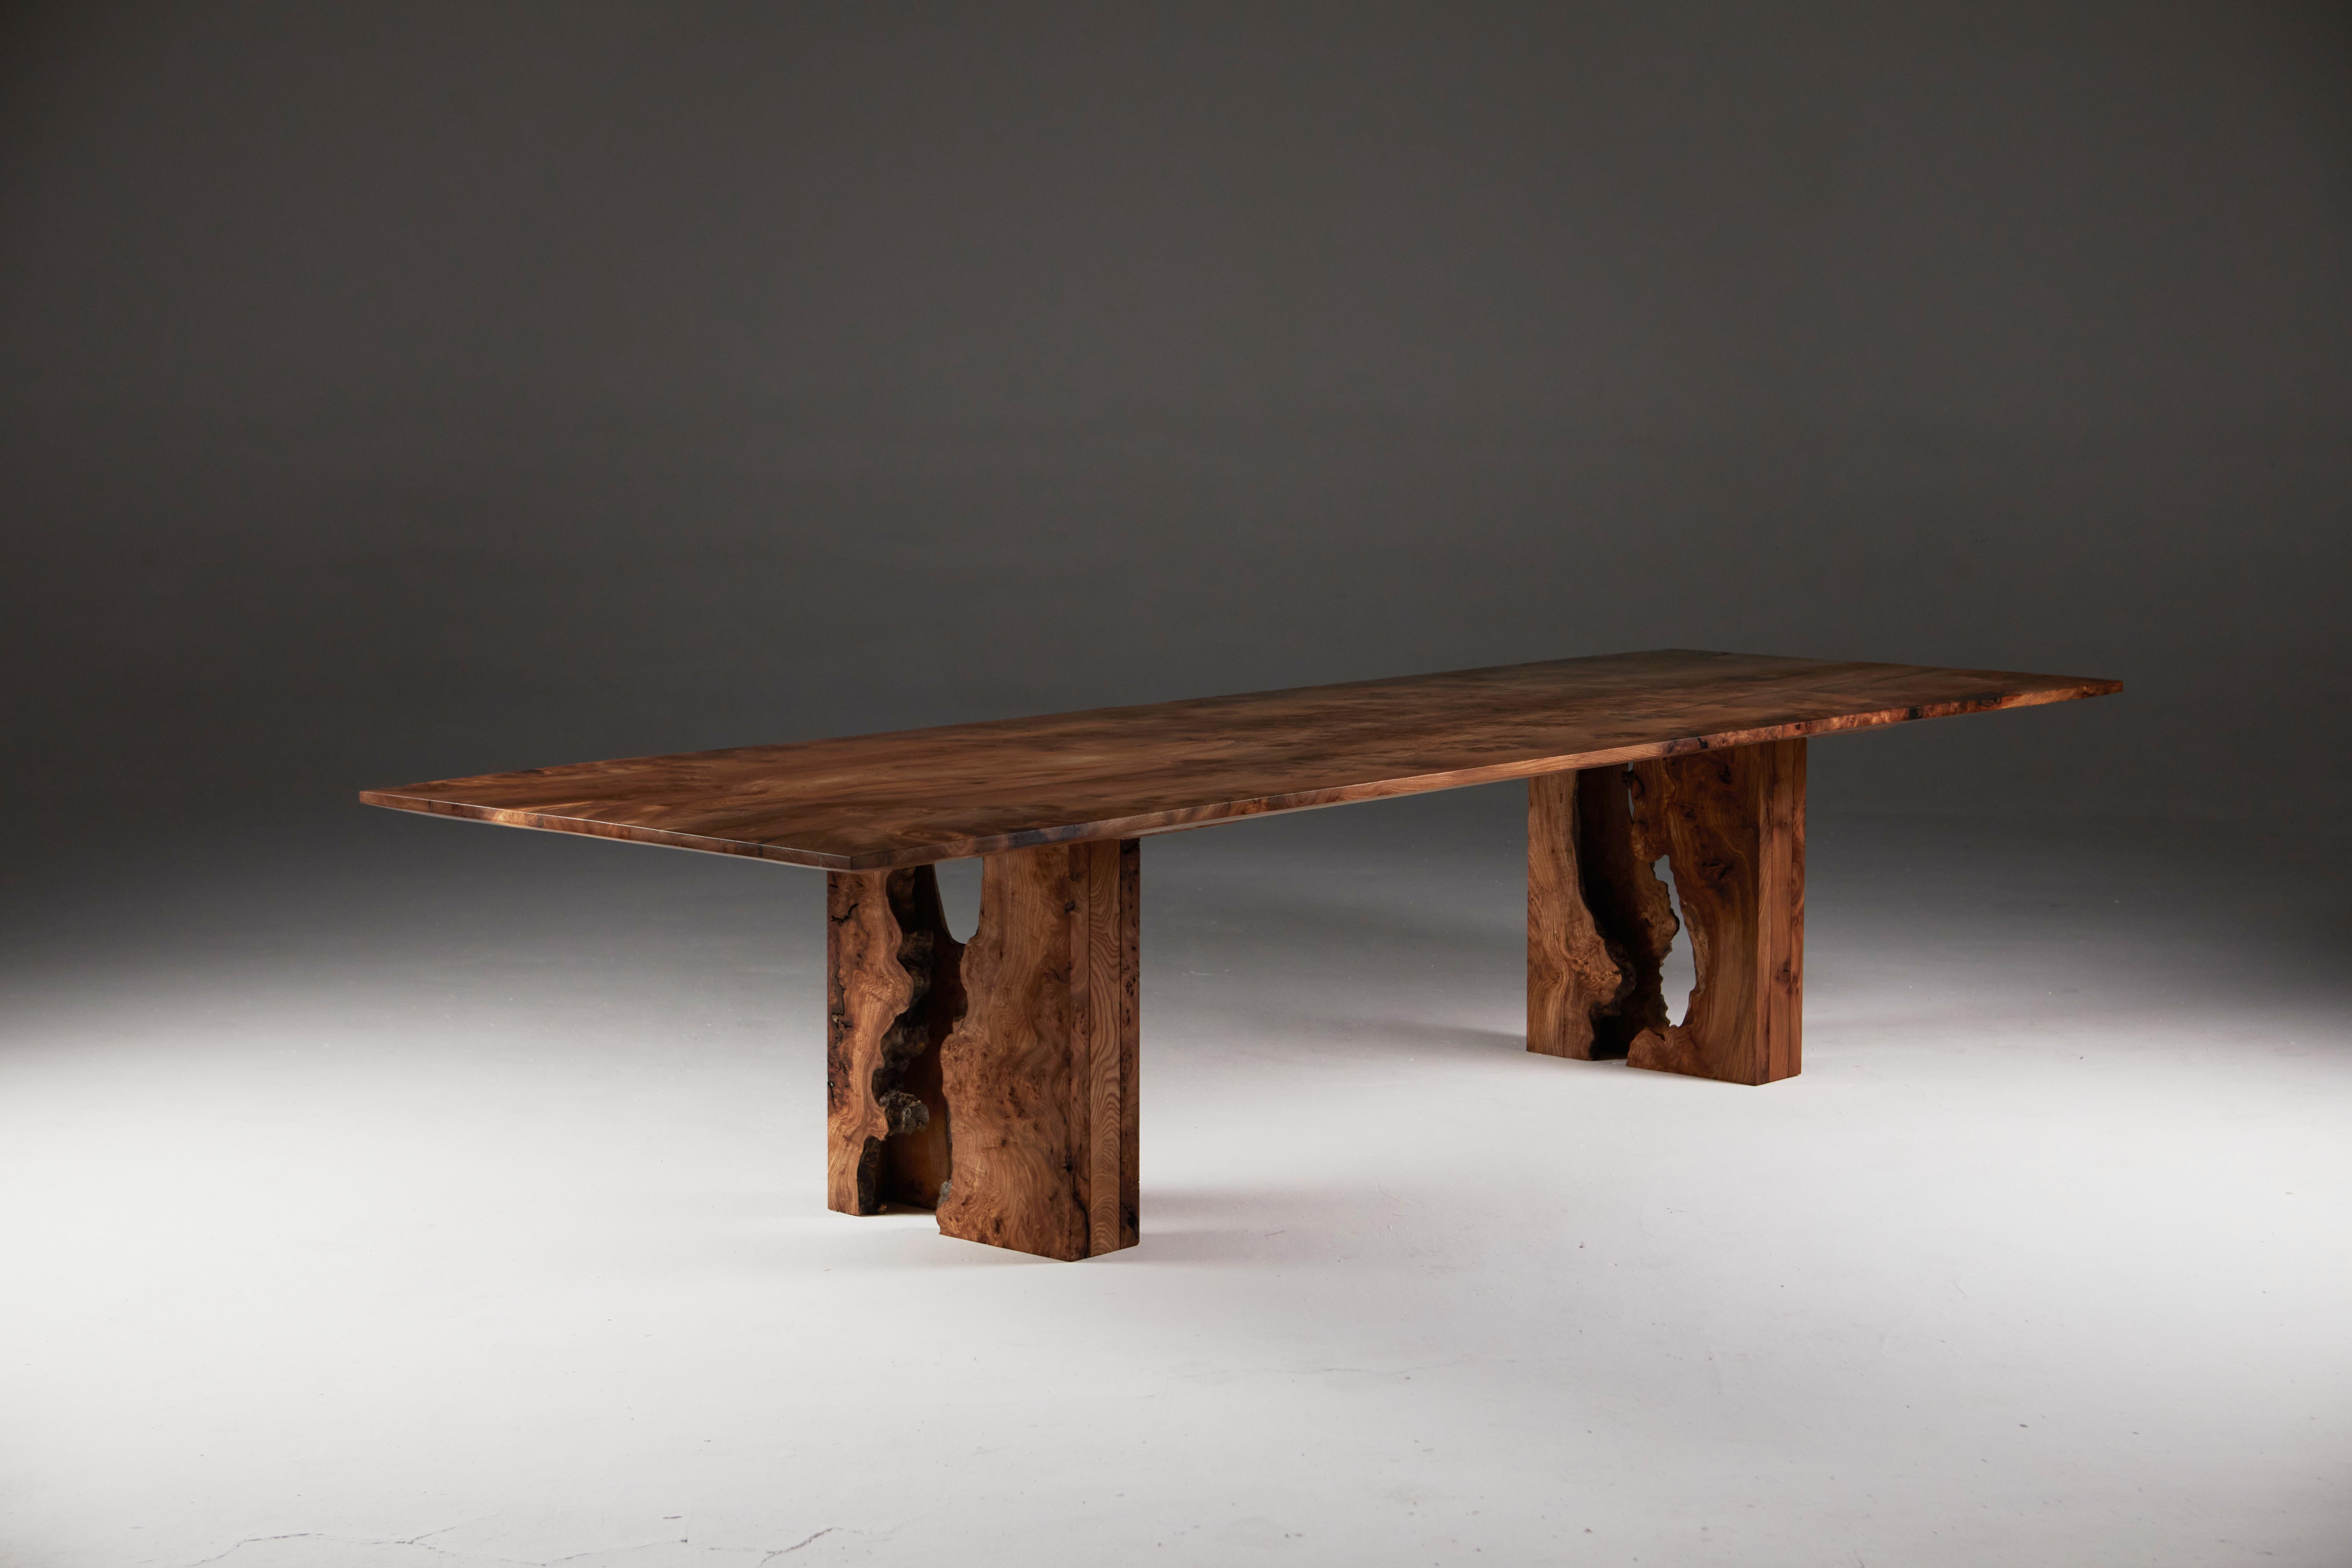 Oiled Scottish Burr Elm Table with Inverted Live Edge Legs and Book-matched Top. 